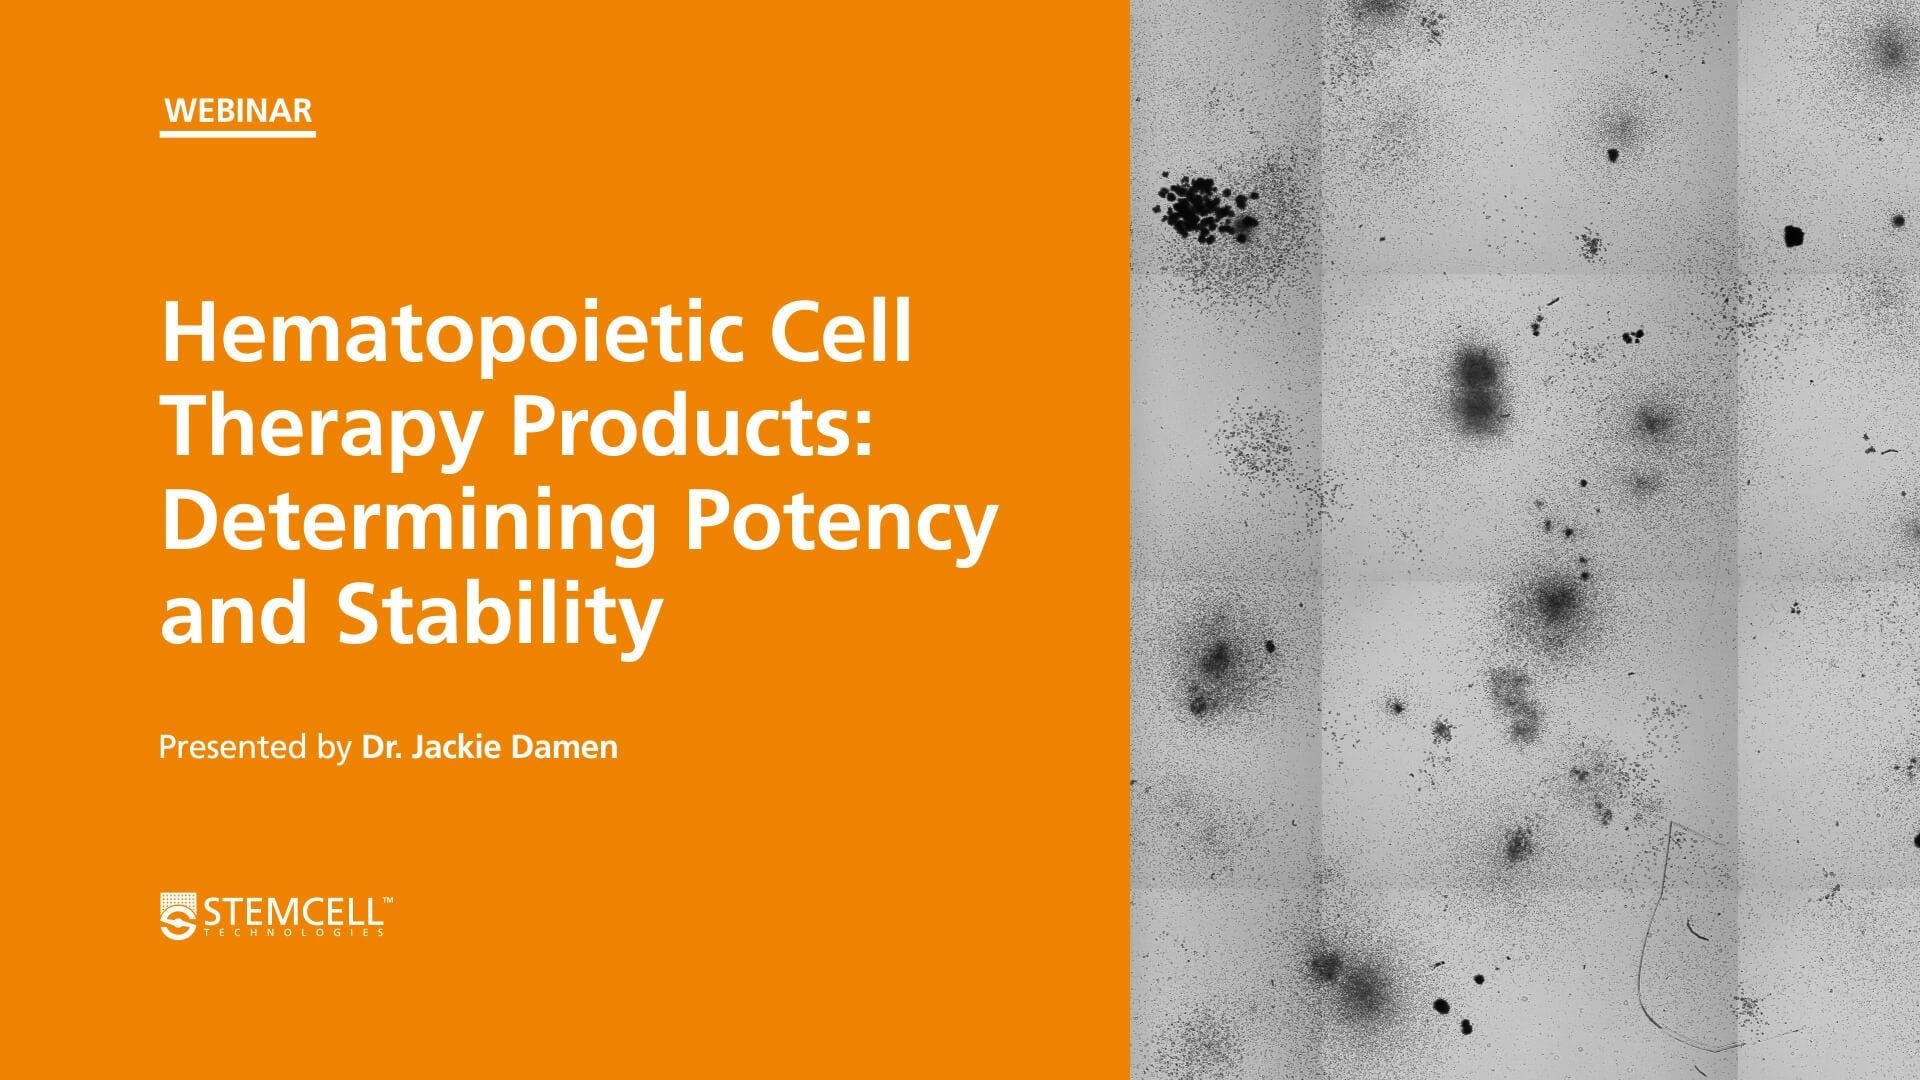 Determining the Potency & Stability of Hematopoietic Cells